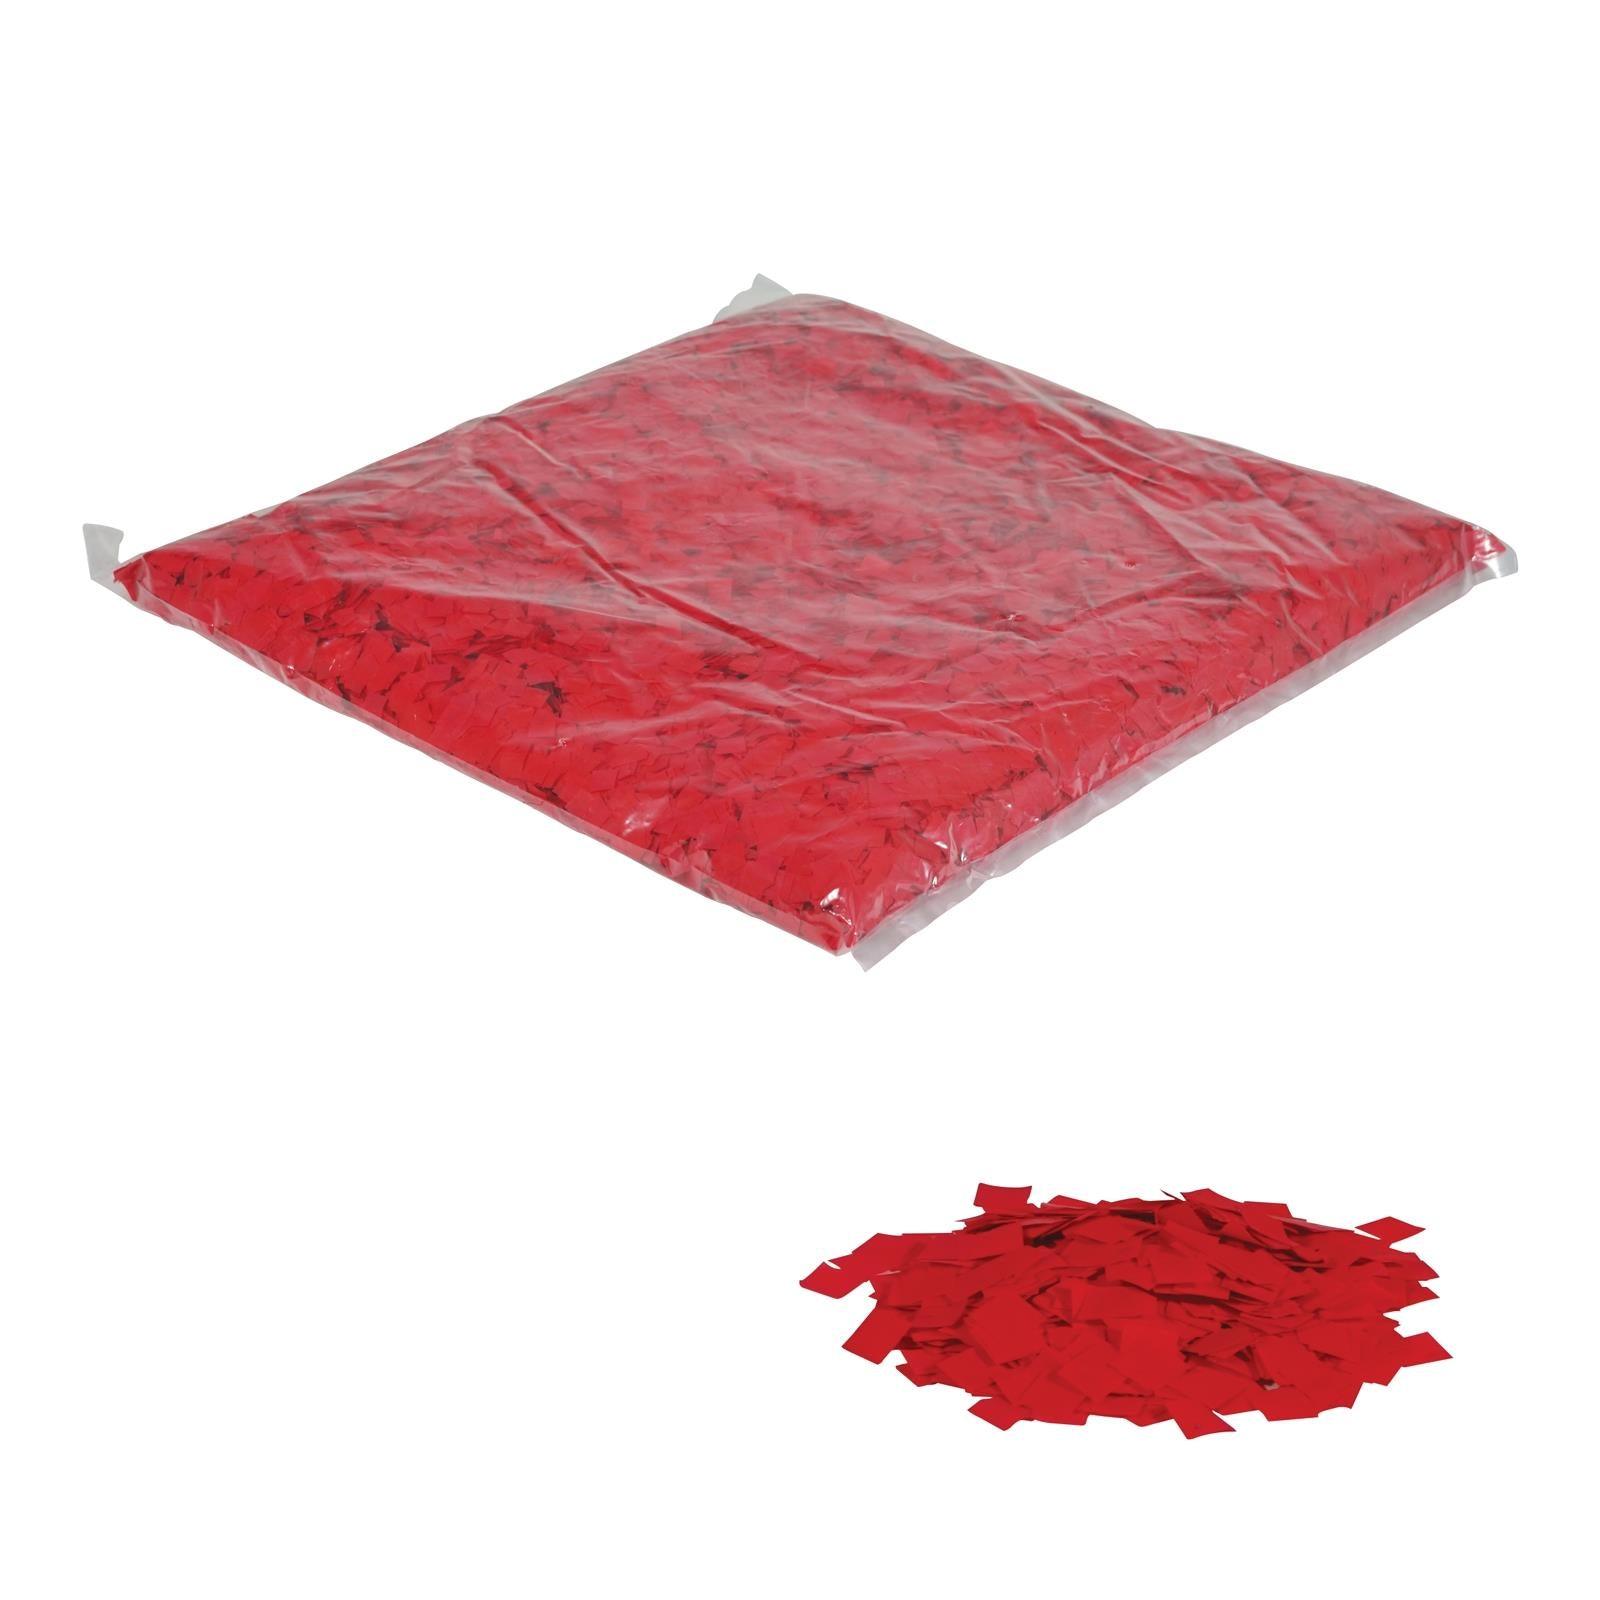 Equinox 10 x 10mm Red 1KG Loose Confetti - DY Pro Audio